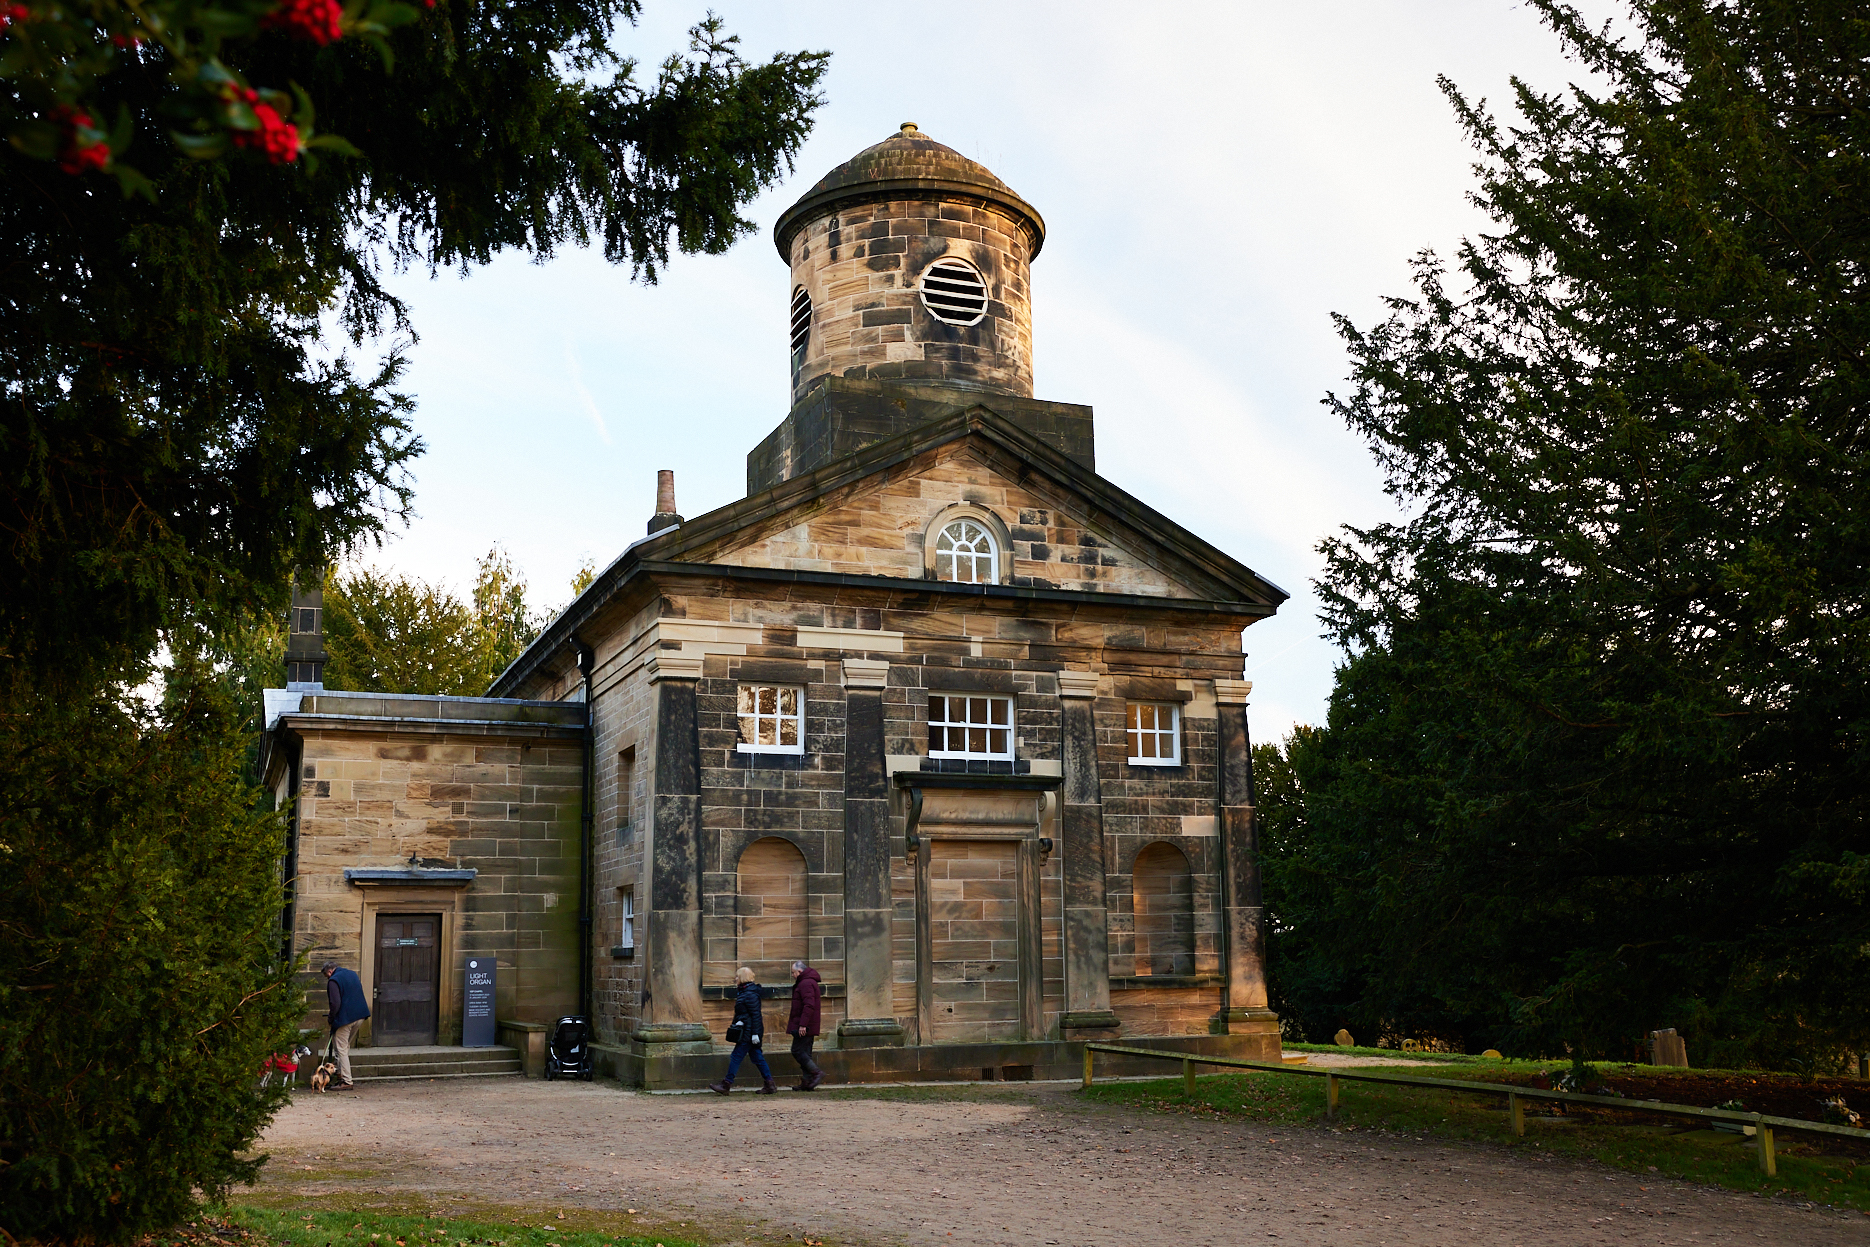 An 18th century chapel building, with a round tower.